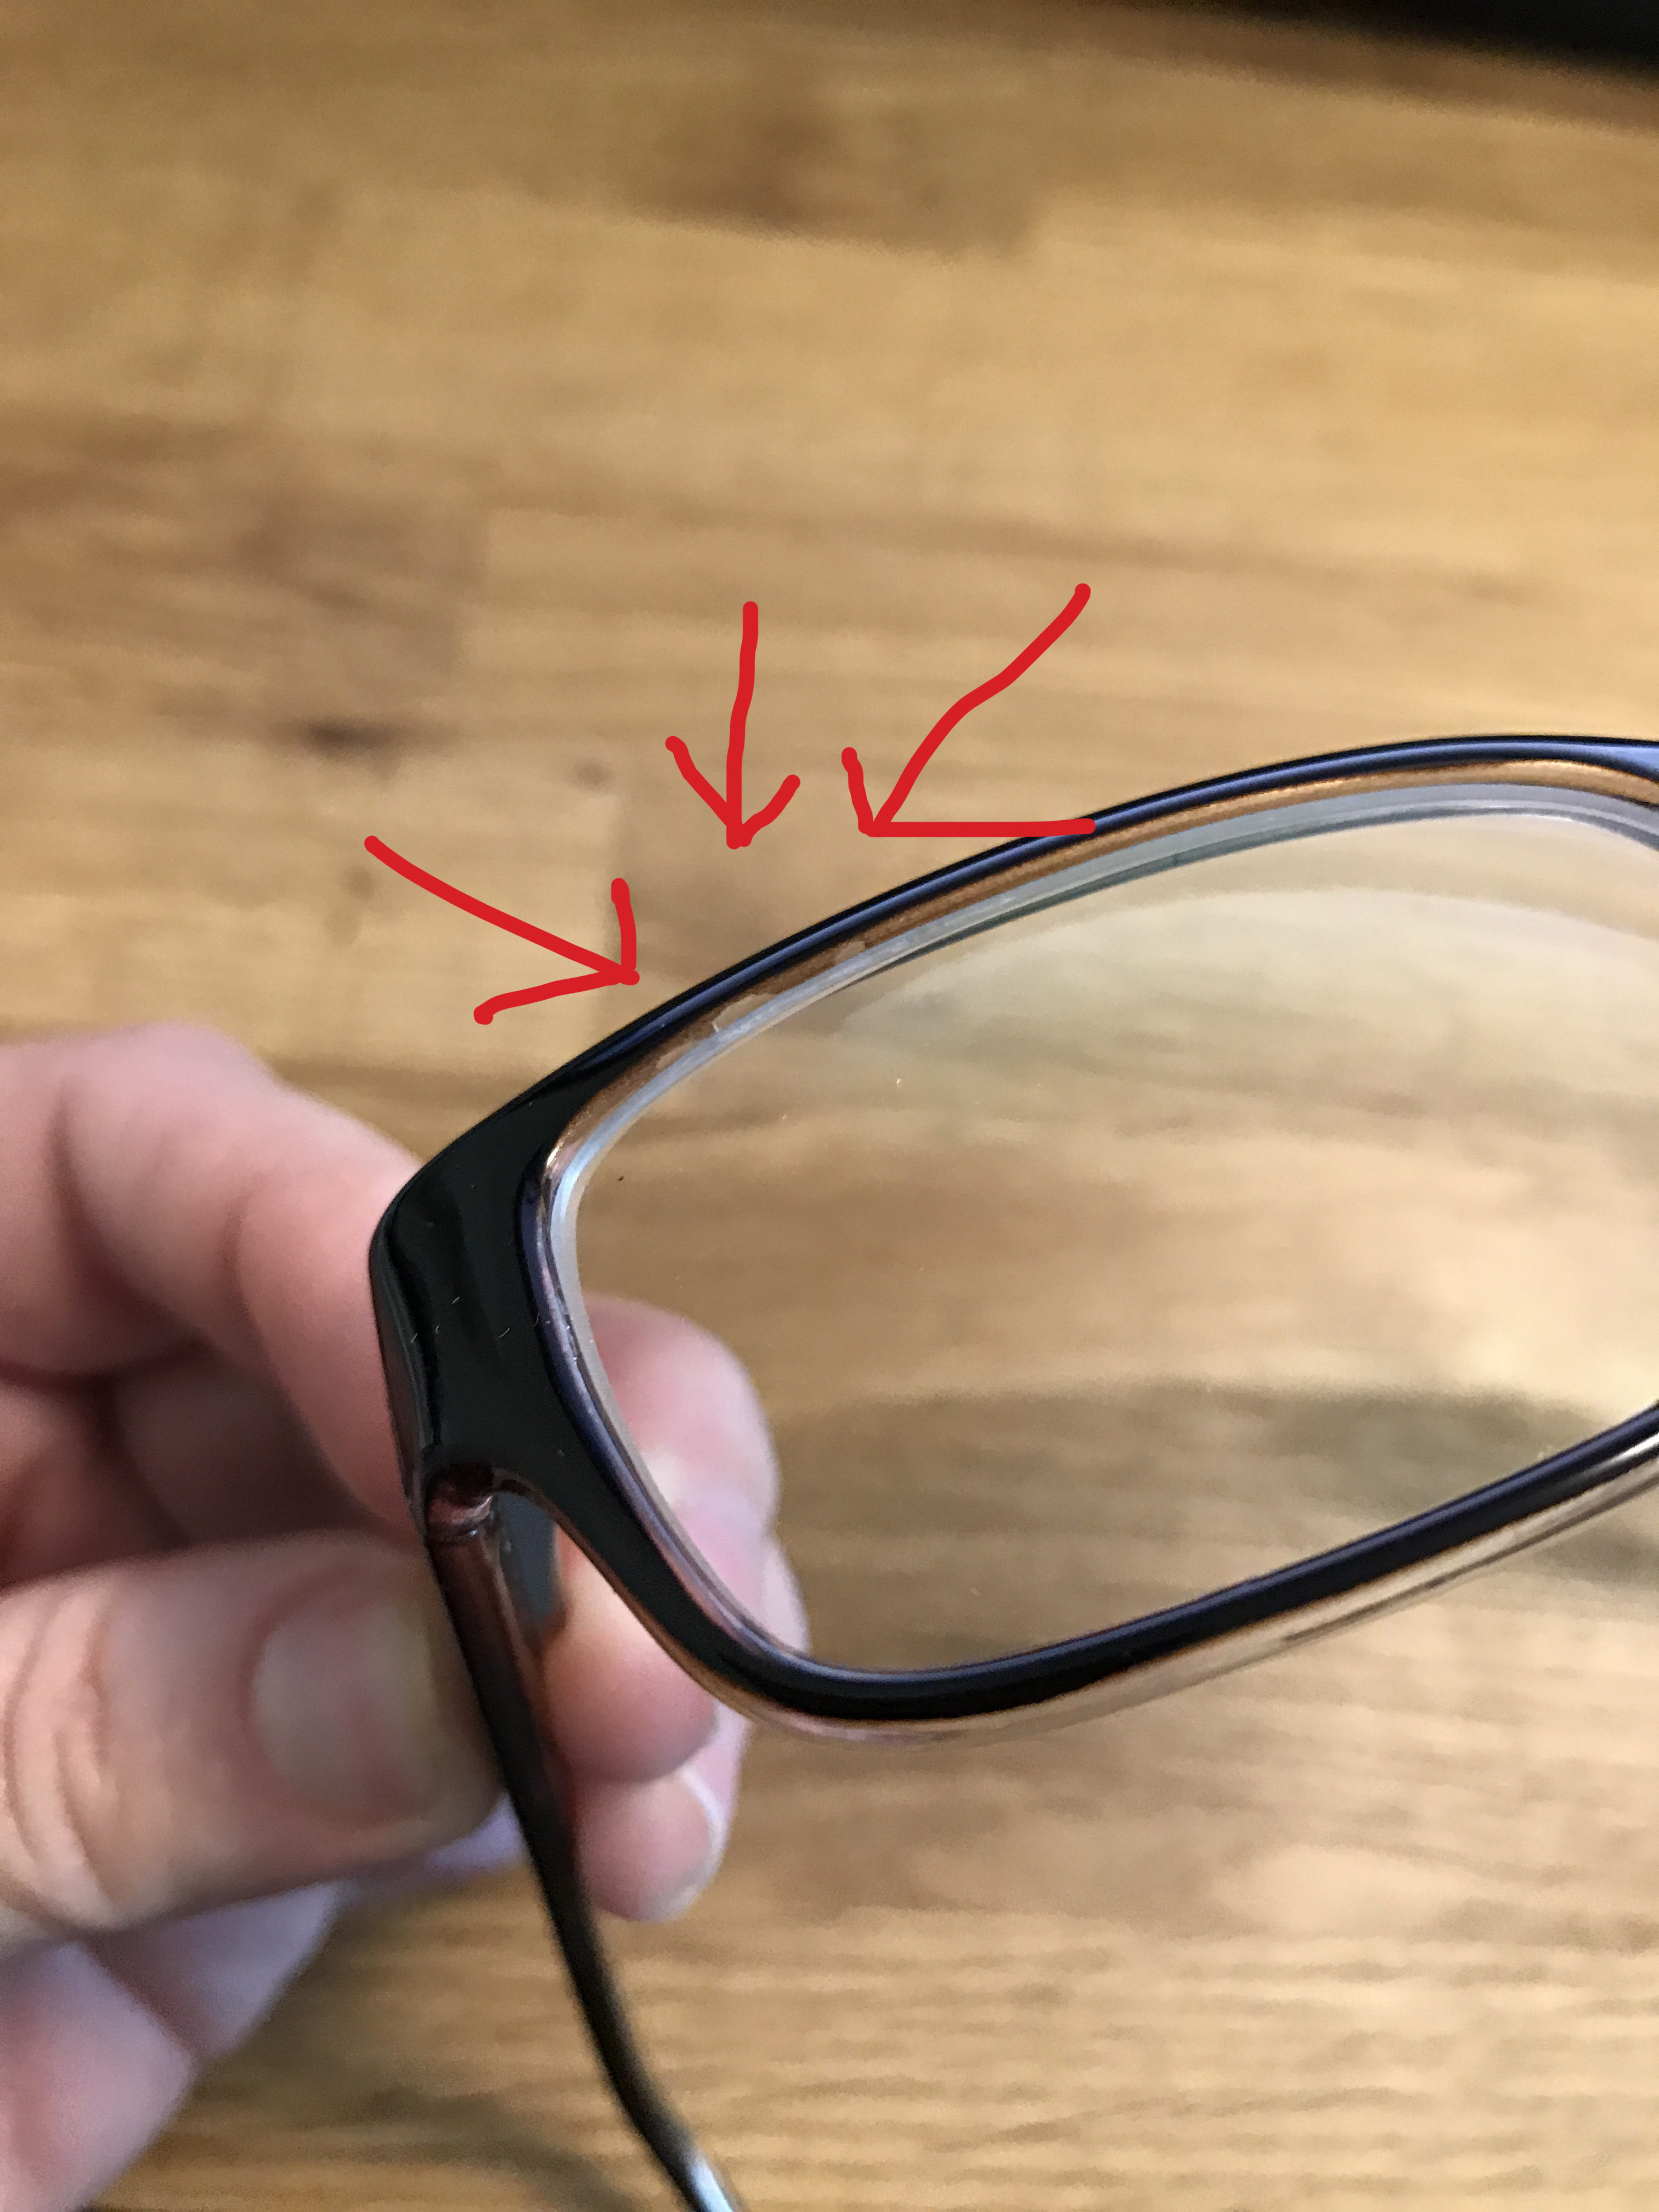 Are reviews of Transition lenses generally positive?